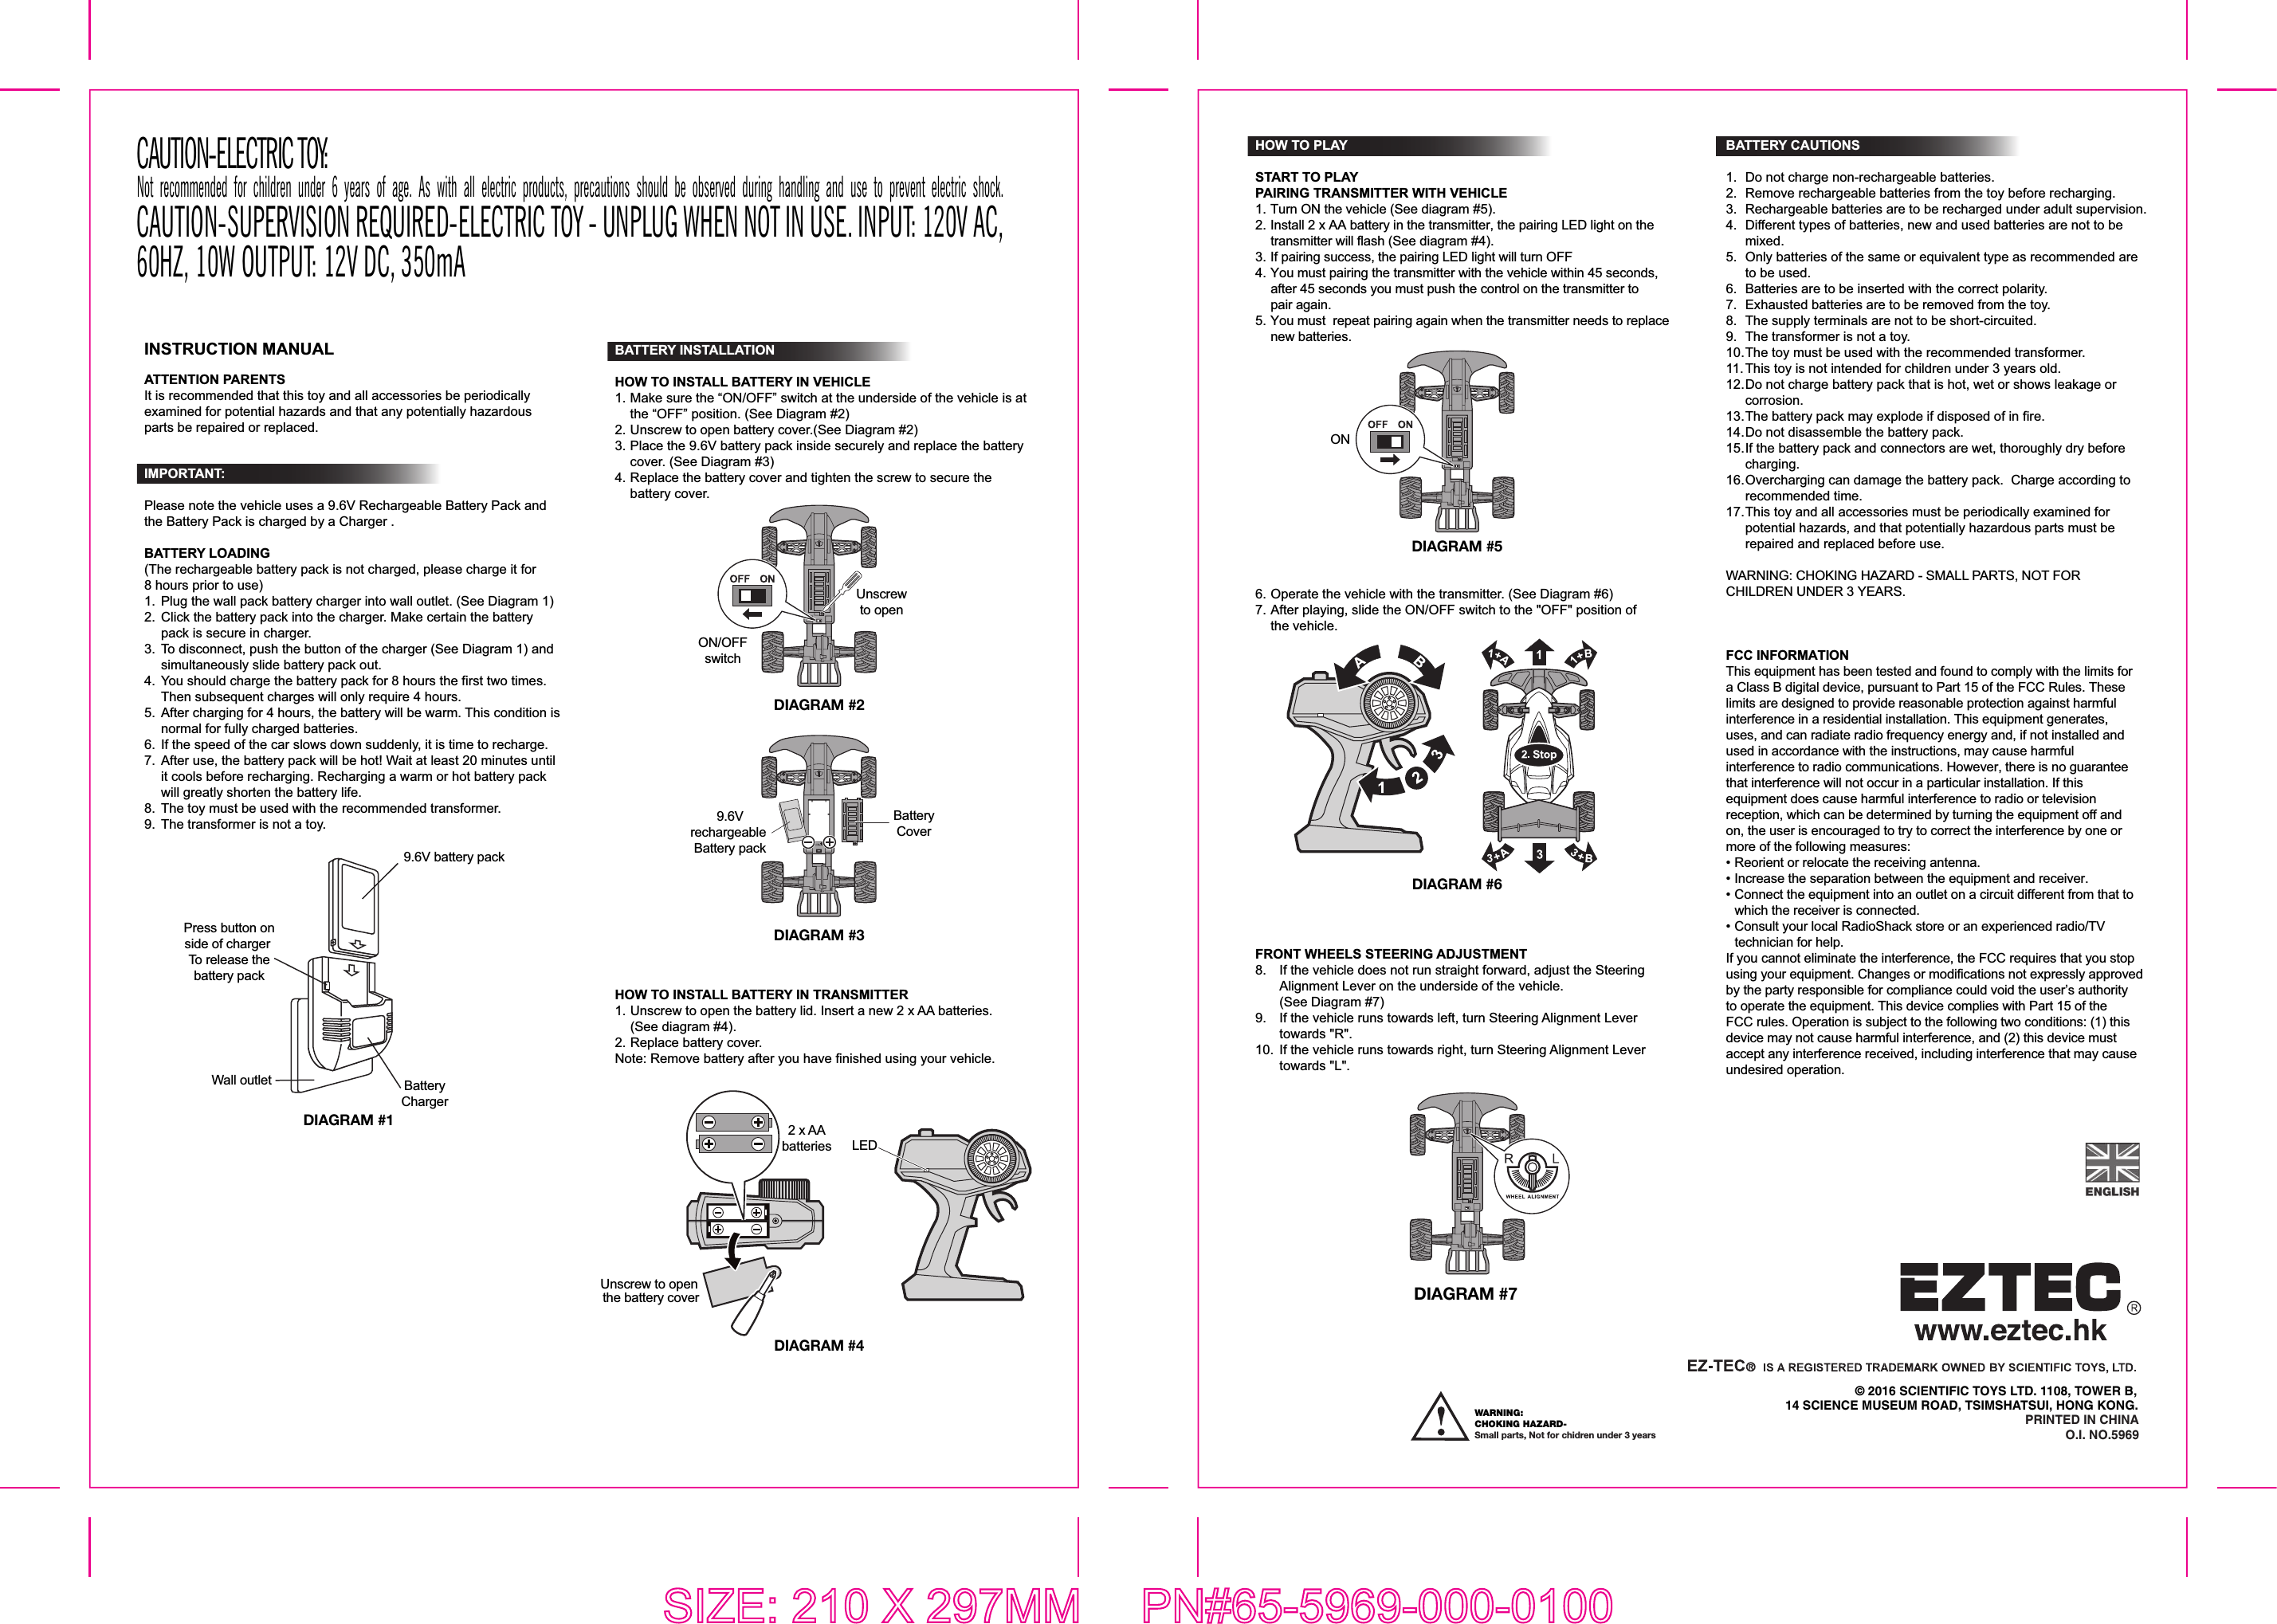 © 2016 SCIENTIFIC TOYS LTD. 1108, TOWER B,14 SCIENCE MUSEUM ROAD, TSIMSHATSUI, HONG KONG.PRINTED IN CHINAO.I. NO.5969INSTRUCTION MANUALATTENTION PARENTSIt is recommended that this toy and all accessories be periodically examined for potential hazards and that any potentially hazardous parts be repaired or replaced.IMPORTANT: Please note the vehicle uses a 9.6V Rechargeable Battery Pack and the Battery Pack is charged by a Charger .  BATTERY LOADING(The rechargeable battery pack is not charged, please charge it for 8 hours prior to use)1.  Plug the wall pack battery charger into wall outlet. (See Diagram 1) 2.  Click the battery pack into the charger. Make certain the battery   pack is secure in charger. 3.  To disconnect, push the button of the charger (See Diagram 1) and  simultaneously slide battery pack out. 4.  You should charge the battery pack for 8 hours the first two times.   Then subsequent charges will only require 4 hours. 5.  After charging for 4 hours, the battery will be warm. This condition is   normal for fully charged batteries. 6.  If the speed of the car slows down suddenly, it is time to recharge. 7.  After use, the battery pack will be hot! Wait at least 20 minutes until   it cools before recharging. Recharging a warm or hot battery pack  will greatly shorten the battery life.8.  The toy must be used with the recommended transformer.9.  The transformer is not a toy.SIZE: 210 X 297MM  PN#65-5969-000-0100DIAGRAM #1BatteryCharger9.6V battery packPress button onside of charger To release thebattery packWall outletDIAGRAM #2DIAGRAM #3BATTERY INSTALLATIONHOW TO INSTALL BATTERY IN VEHICLE1. Make sure the “ON/OFF” switch at the underside of the vehicle is at   the “OFF” position. (See Diagram #2) 2. Unscrew to open battery cover.(See Diagram #2)3. Place the 9.6V battery pack inside securely and replace the battery  cover. (See Diagram #3)4. Replace the battery cover and tighten the screw to secure the  battery cover.ON/OFFswitchUnscrewto open9.6Vrechargeable Battery packBatteryCoverBATTERY CAUTIONS1.  Do not charge non-rechargeable batteries.2.  Remove rechargeable batteries from the toy before recharging.3.  Rechargeable batteries are to be recharged under adult supervision.4.  Different types of batteries, new and used batteries are not to be  mixed.5.  Only batteries of the same or equivalent type as recommended are   to be used.6.  Batteries are to be inserted with the correct polarity.7.  Exhausted batteries are to be removed from the toy.8.  The supply terminals are not to be short-circuited.9.  The transformer is not a toy.10. The toy must be used with the recommended transformer.11. This toy is not intended for children under 3 years old.12. Do not charge battery pack that is hot, wet or shows leakage or  corrosion.13. The battery pack may explode if disposed of in fire.14. Do not disassemble the battery pack.15. If the battery pack and connectors are wet, thoroughly dry before  charging.16. Overcharging can damage the battery pack.  Charge according to  recommended time.17. This toy and all accessories must be periodically examined for   potential hazards, and that potentially hazardous parts must be   repaired and replaced before use. WARNING: CHOKING HAZARD - SMALL PARTS, NOT FOR CHILDREN UNDER 3 YEARS.FCC INFORMATIONThis equipment has been tested and found to comply with the limits for a Class B digital device, pursuant to Part 15 of the FCC Rules. These limits are designed to provide reasonable protection against harmful interference in a residential installation. This equipment generates, uses, and can radiate radio frequency energy and, if not installed and used in accordance with the instructions, may cause harmful interference to radio communications. However, there is no guarantee that interference will not occur in a particular installation. If this equipment does cause harmful interference to radio or television reception, which can be determined by turning the equipment off and on, the user is encouraged to try to correct the interference by one or more of the following measures:•  Reorient or relocate the receiving antenna.•  Increase the separation between the equipment and receiver.•  Connect the equipment into an outlet on a circuit different from that to   which the receiver is connected.•  Consult your local RadioShack store or an experienced radio/TV   technician for help.If you cannot eliminate the interference, the FCC requires that you stop using your equipment. Changes or modifications not expressly approved by the party responsible for compliance could void the user’s authority to operate the equipment. This device complies with Part 15 of the FCC rules. Operation is subject to the following two conditions: (1) this device may not cause harmful interference, and (2) this device must accept any interference received, including interference that may cause undesired operation.DIAGRAM #66. Operate the vehicle with the transmitter. (See Diagram #6)7. After playing, slide the ON/OFF switch to the &quot;OFF&quot; position of  the vehicle.HOW TO PLAYSTART TO PLAYPAIRING TRANSMITTER WITH VEHICLE1. Turn ON the vehicle (See diagram #5).2. Install 2 x AA battery in the transmitter, the pairing LED light on the  transmitter will flash (See diagram #4).3. If pairing success, the pairing LED light will turn OFF4. You must pairing the transmitter with the vehicle within 45 seconds,   after 45 seconds you must push the control on the transmitter to  pair again.5. You must  repeat pairing again when the transmitter needs to replace  new batteries.DIAGRAM #5ONHOW TO INSTALL BATTERY IN TRANSMITTER1. Unscrew to open the battery lid. Insert a new 2 x AA batteries.  (See diagram #4). 2. Replace battery cover.Note: Remove battery after you have finished using your vehicle.DIAGRAM #4Unscrew to open the battery cover2 x AAbatteries LEDFRONT WHEELS STEERING ADJUSTMENT8.  If the vehicle does not run straight forward, adjust the Steering   Alignment Lever on the underside of the vehicle.  (See Diagram #7)9.  If the vehicle runs towards left, turn Steering Alignment Lever  towards &quot;R&quot;.10.  If the vehicle runs towards right, turn Steering Alignment Lever  towards &quot;L&quot;.DIAGRAM #7CAUTION-ELECTRIC TOY: Not recommended for children under 6 years of age. As with all electric products, precautions should be observed during handling and use to prevent electric shock.CAUTION-SUPERVISION REQUIRED-ELECTRIC TOY - UNPLUG WHEN NOT IN USE. INPUT: 120V AC, 60HZ, 10W OUTPUT: 12V DC, 350mAWARNING: CHOKING HAZARD-Small parts, Not for chidren under 3 years